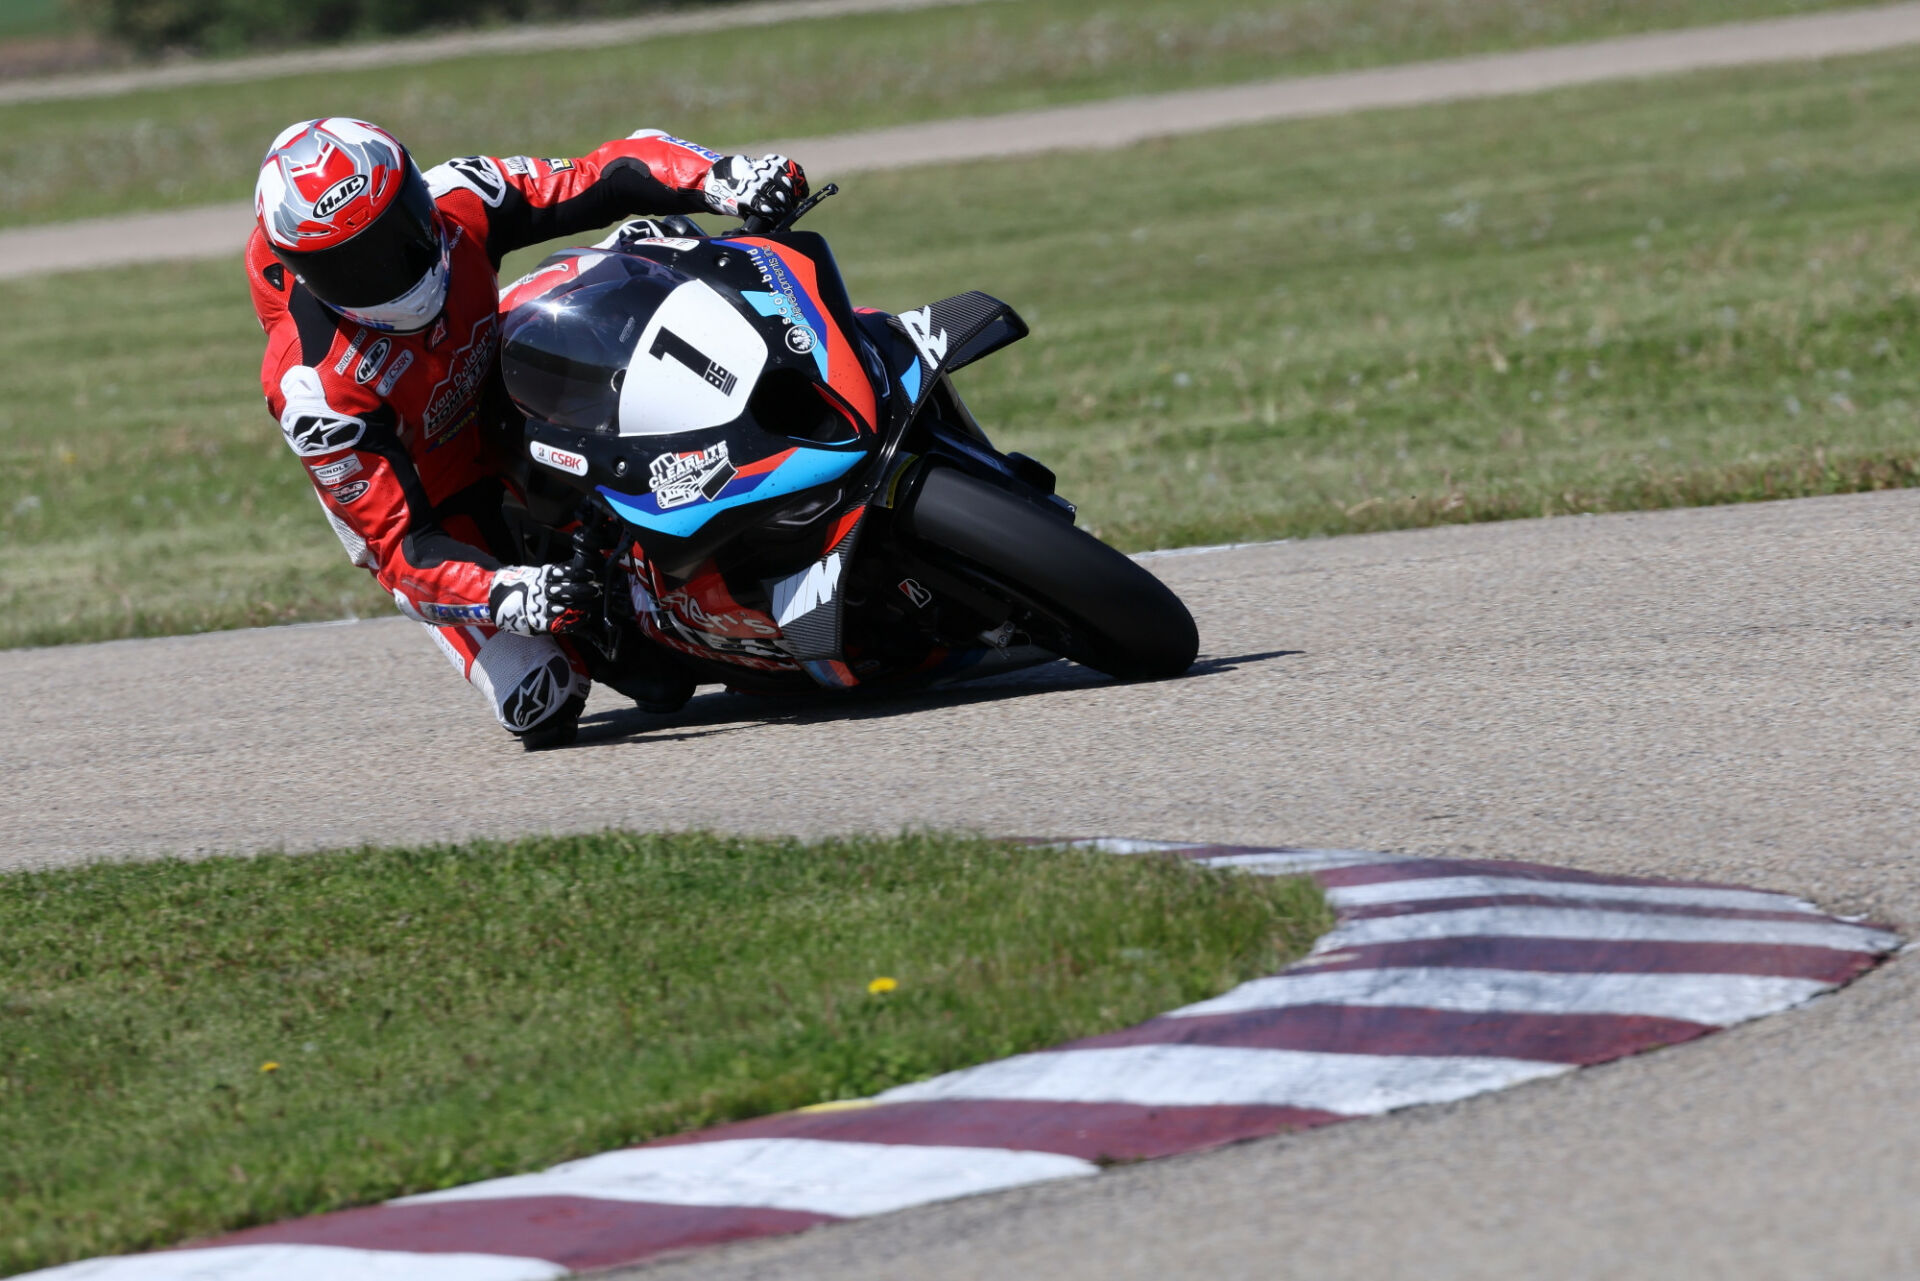 Ben Young (1) has won three times and never been off the Superbike podium at Atlantic Motorsport Park. The defending CSBK champion and current points leader looks to add to that streak as the series returns to Nova Scotia for round four this weekend. Photo by Rob O'Brien, courtesy CSBK.